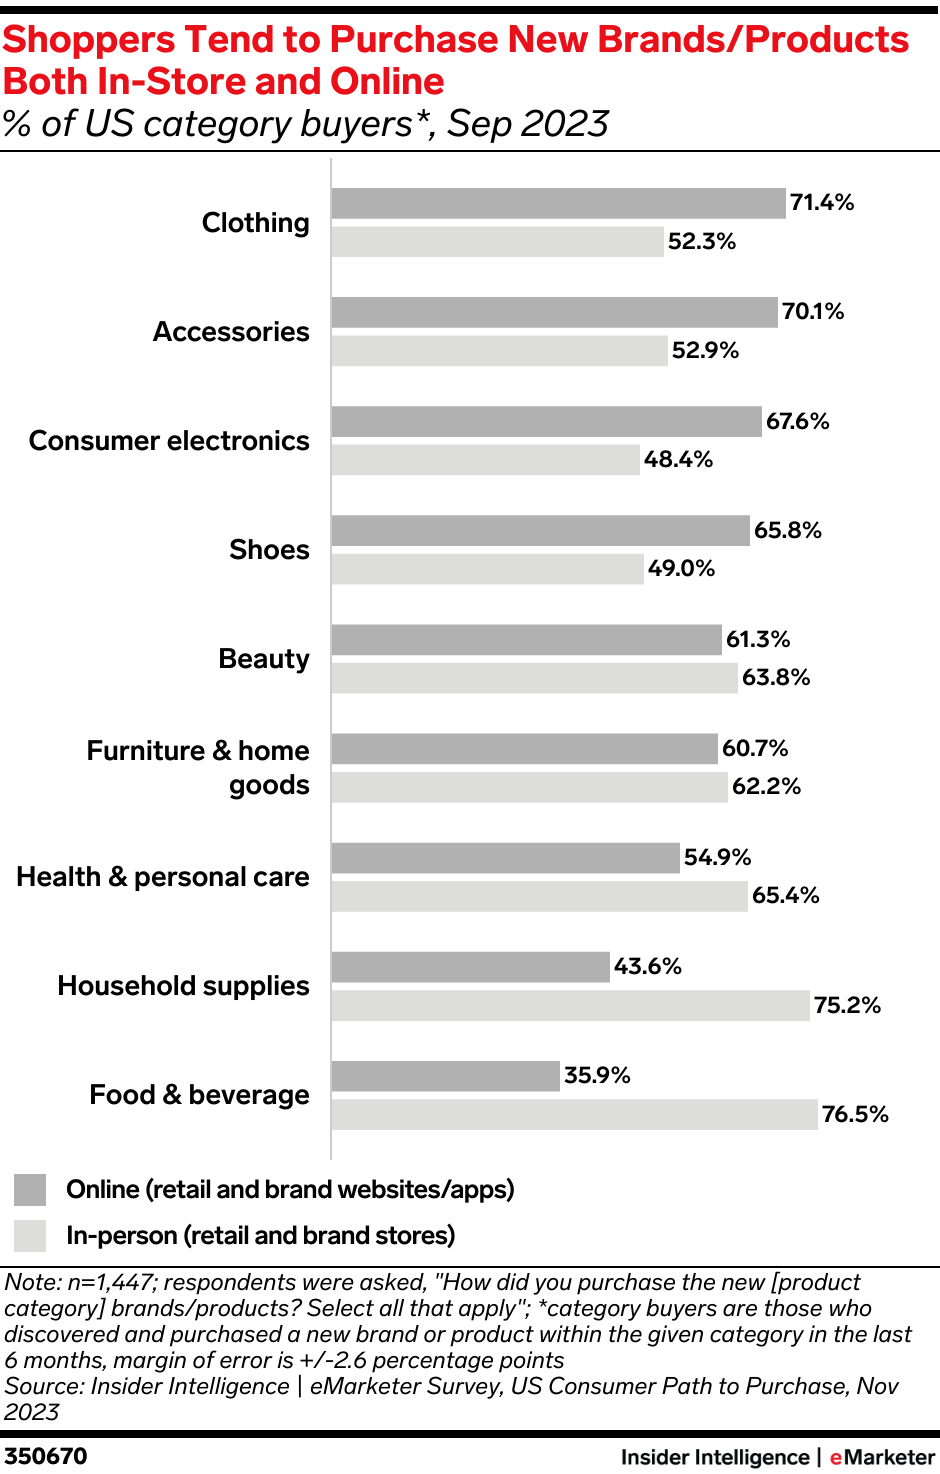 Shoppers Tend to Purchase New Brands/Products Both In-Store and Online (% of US category shoppers*, Sep 2023)